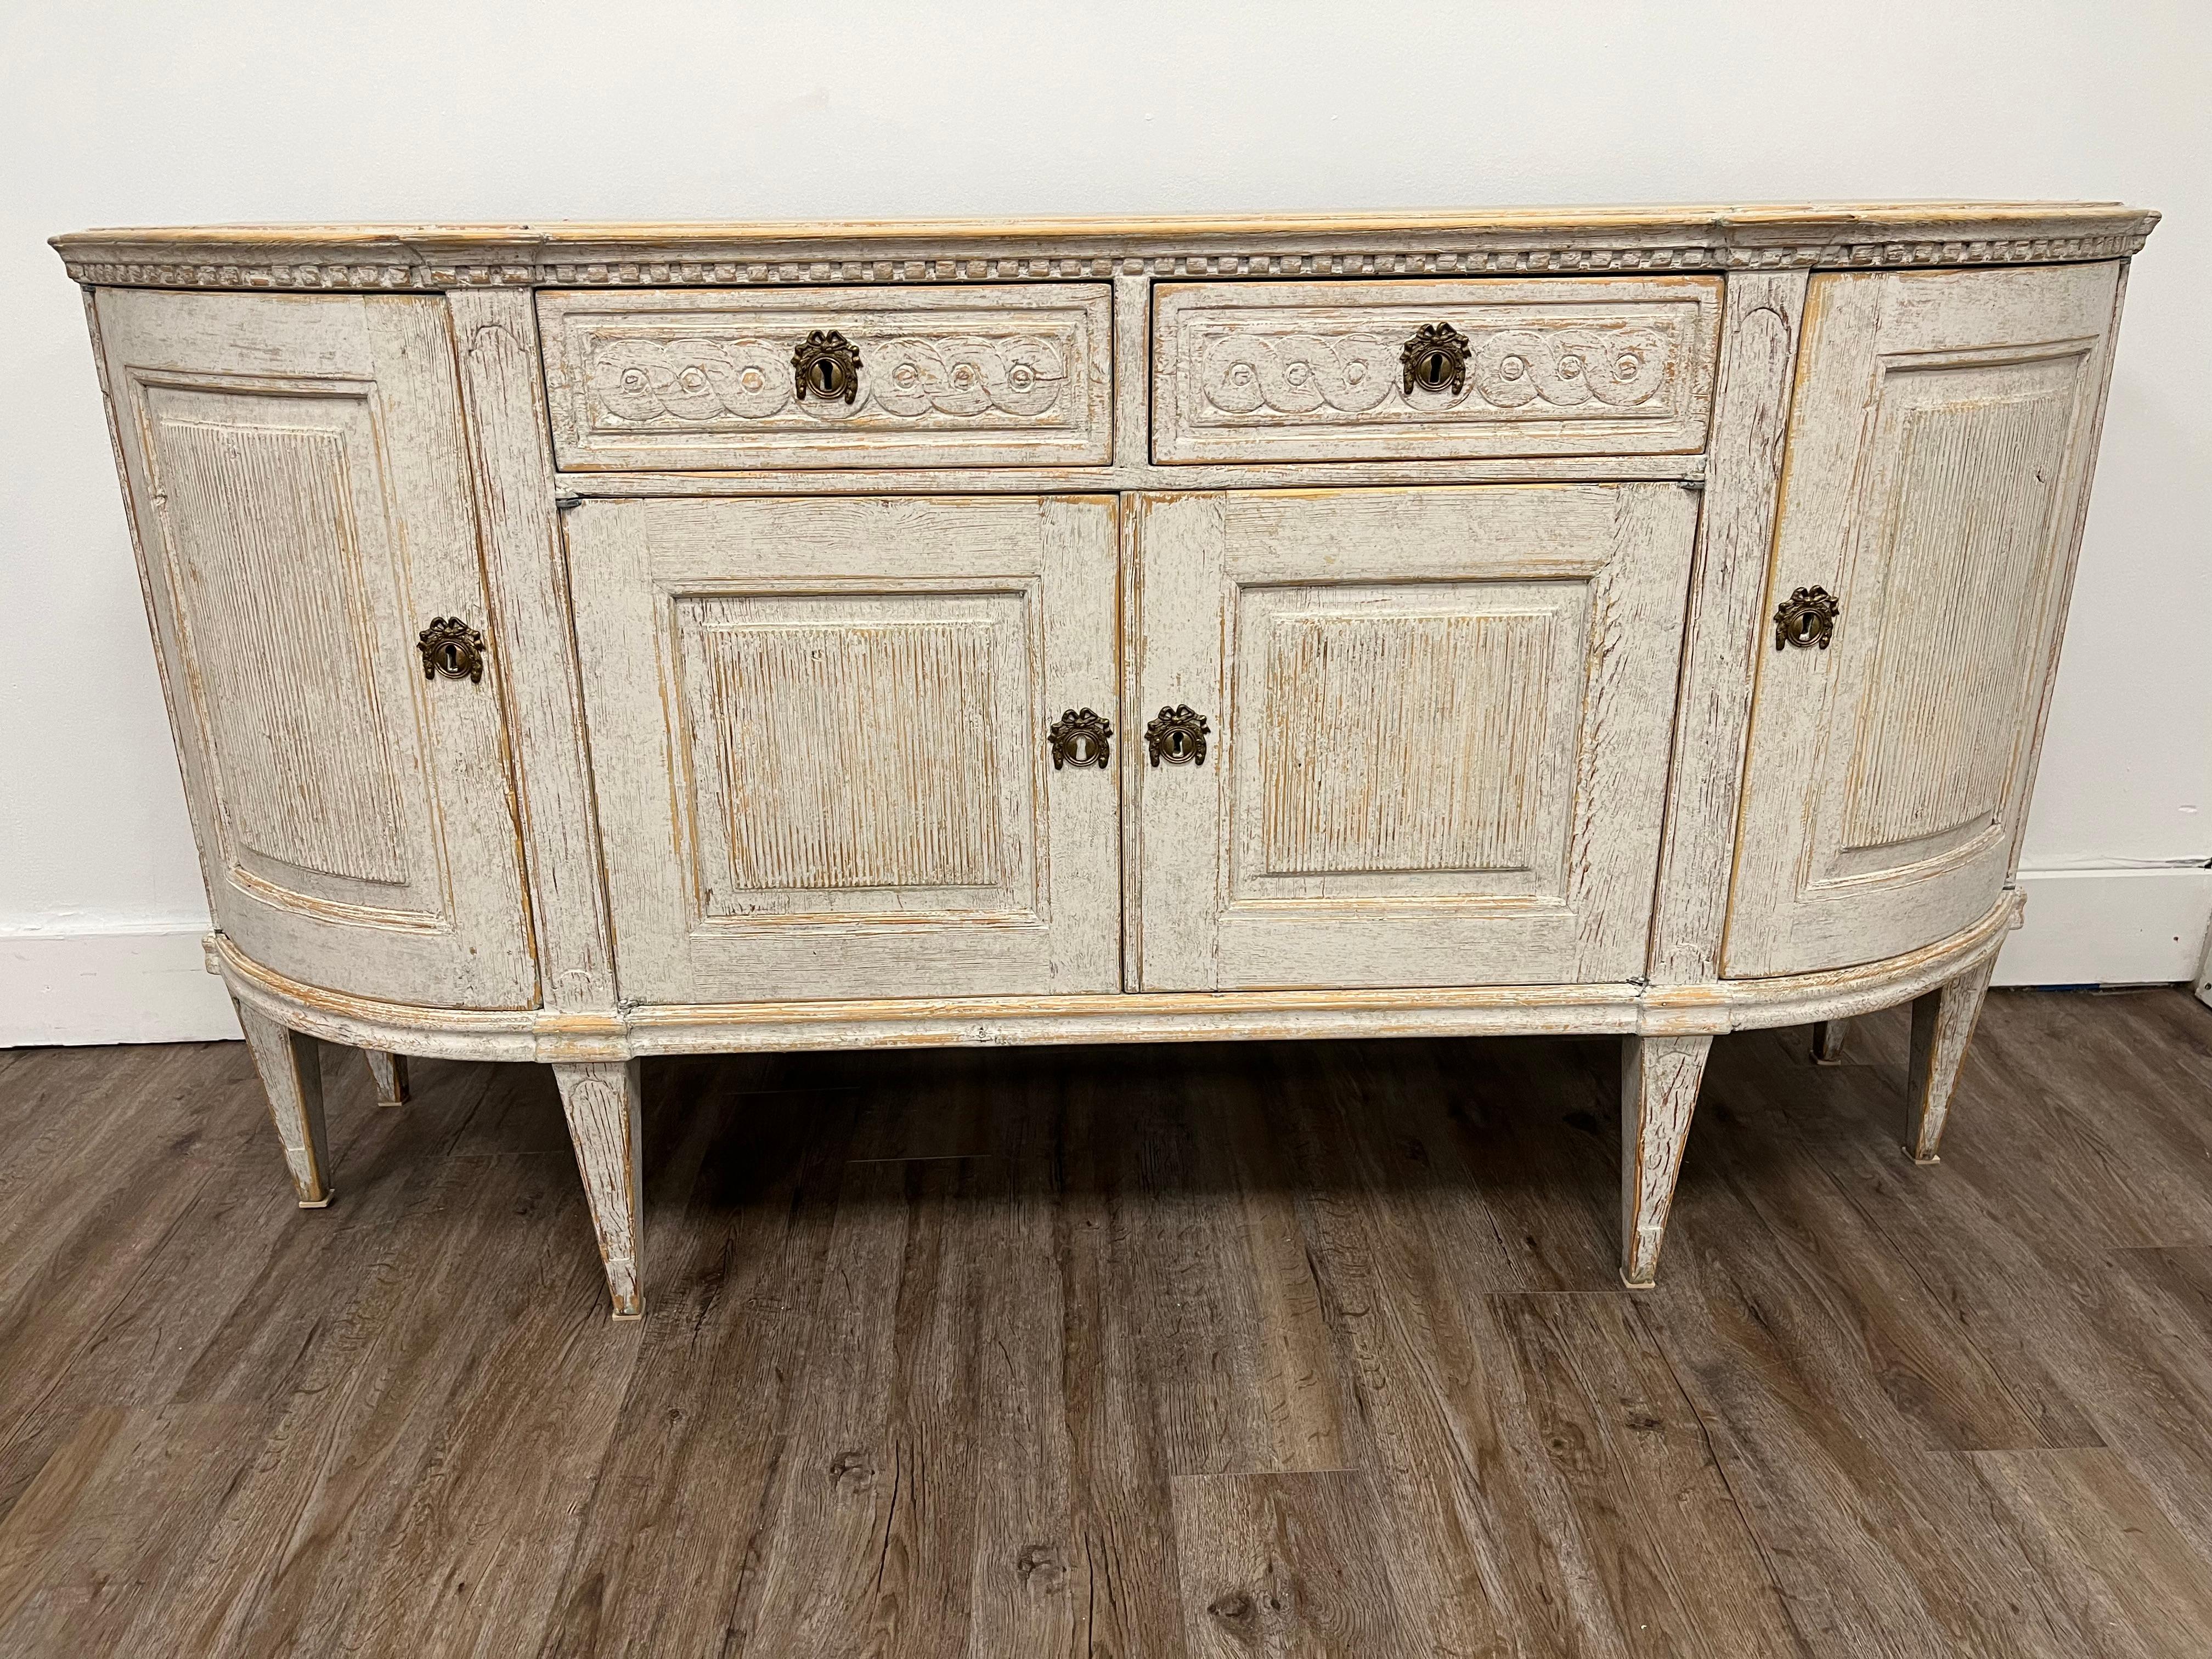 A Swedish late Gustavian sideboard with original brass hardware and locks. Tastefully repainted in pale grey. Featuring curved corner design, beveled top, decorative hand carved dental detail, Guilloché scrolling drawer front motif and vertical